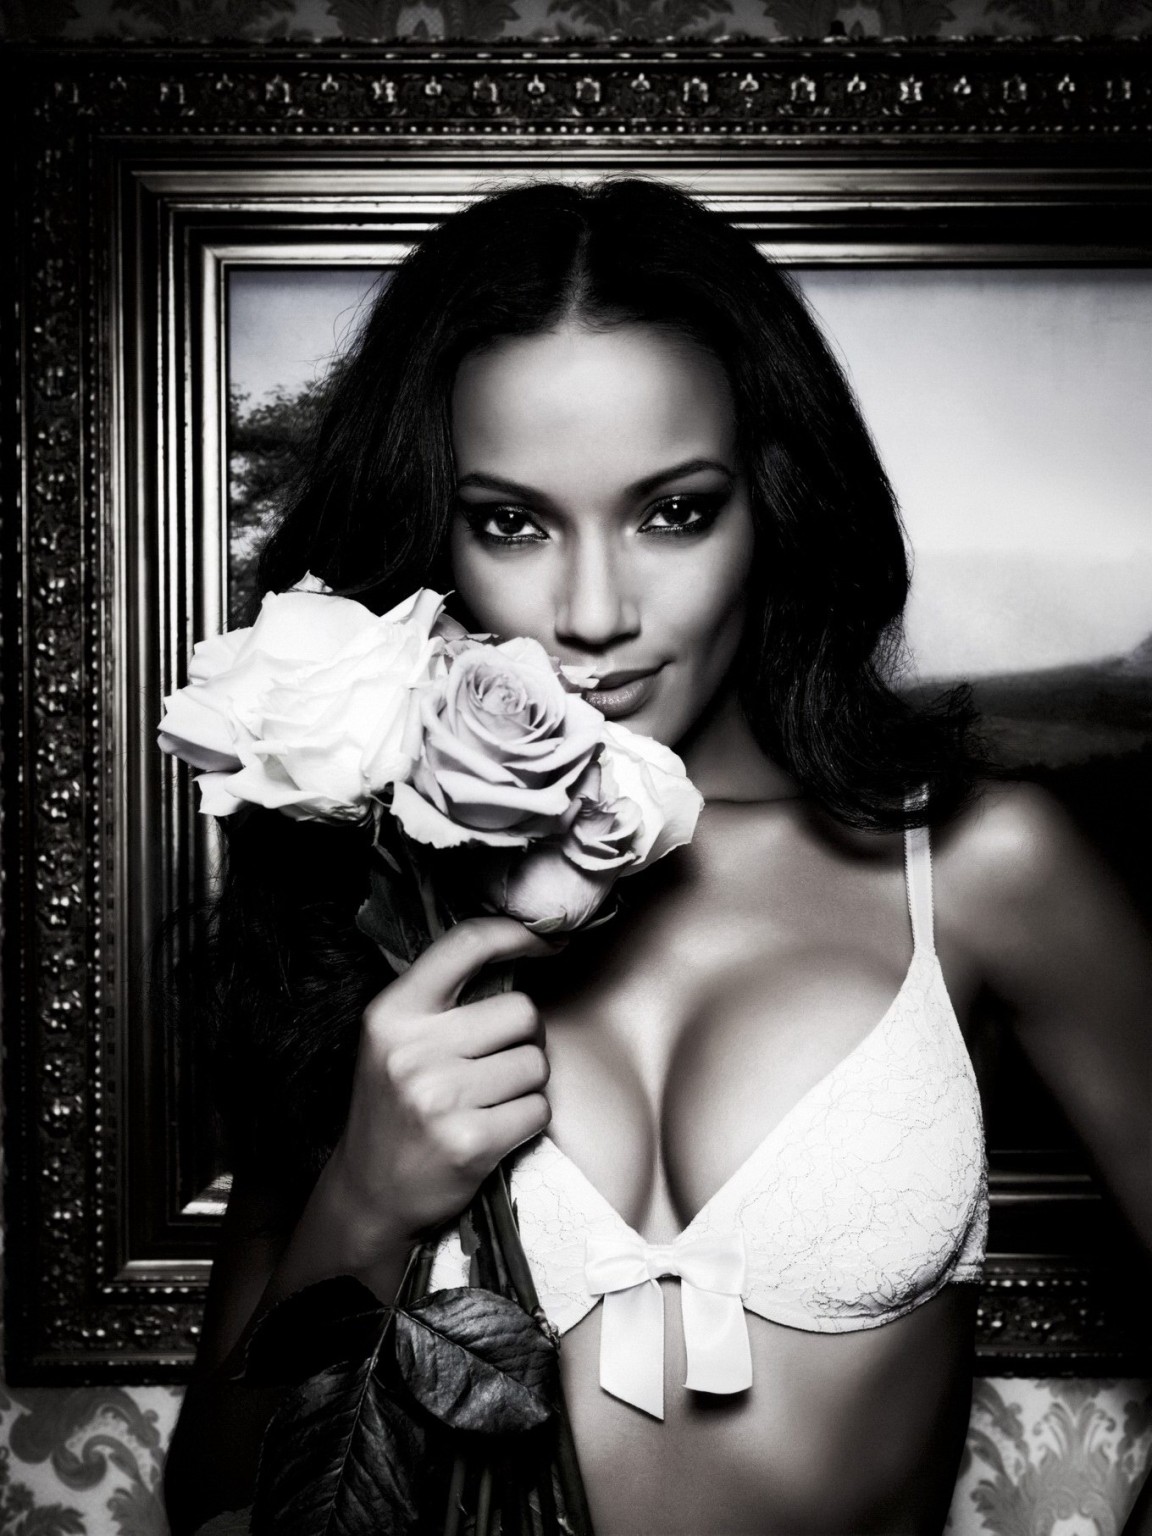 Selita Ebanks showing off her curvy body at new Manor lingerie photoshoot #75241142